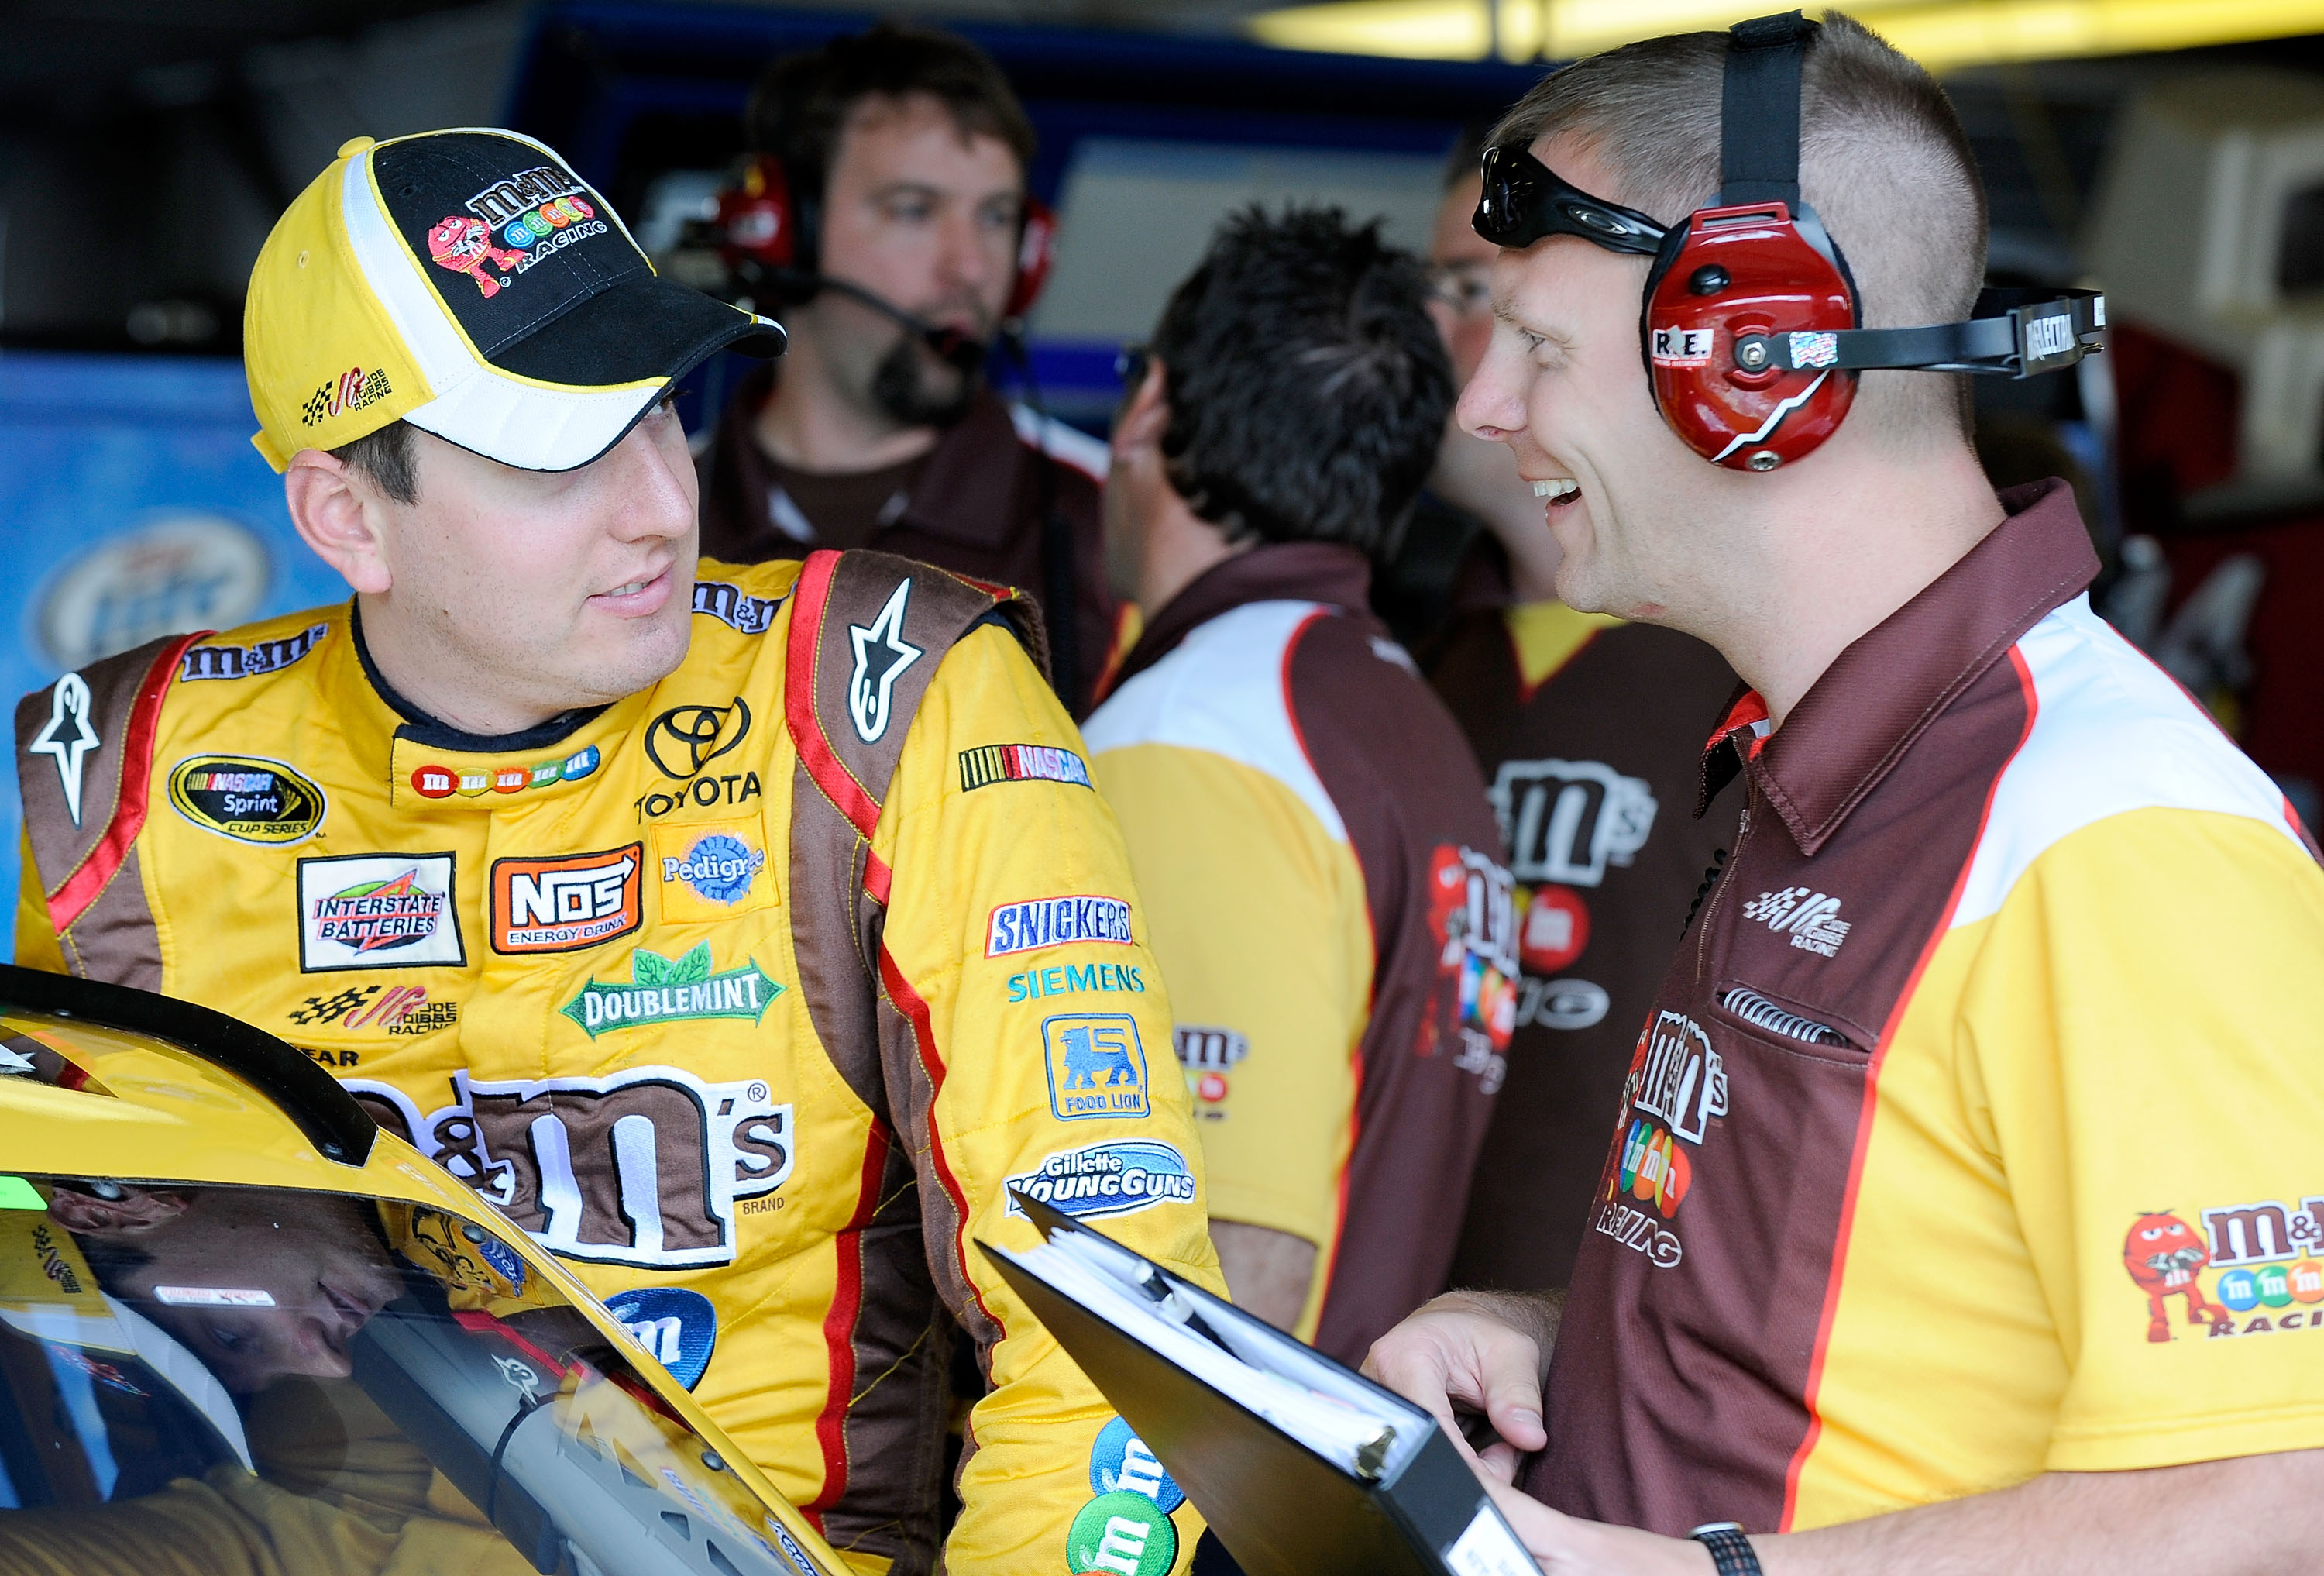 WATKINS GLEN, NY - AUGUST 06:  Kyle Busch (L), driver of the #18 M&M's Toyota, talks with his crew chief Dave Rogers in the garage during practice for the NASCAR Heluva Good! Sour Cream Dips at The Glen on August 6, 2010 in Watkins Glen, New York.  (Photo